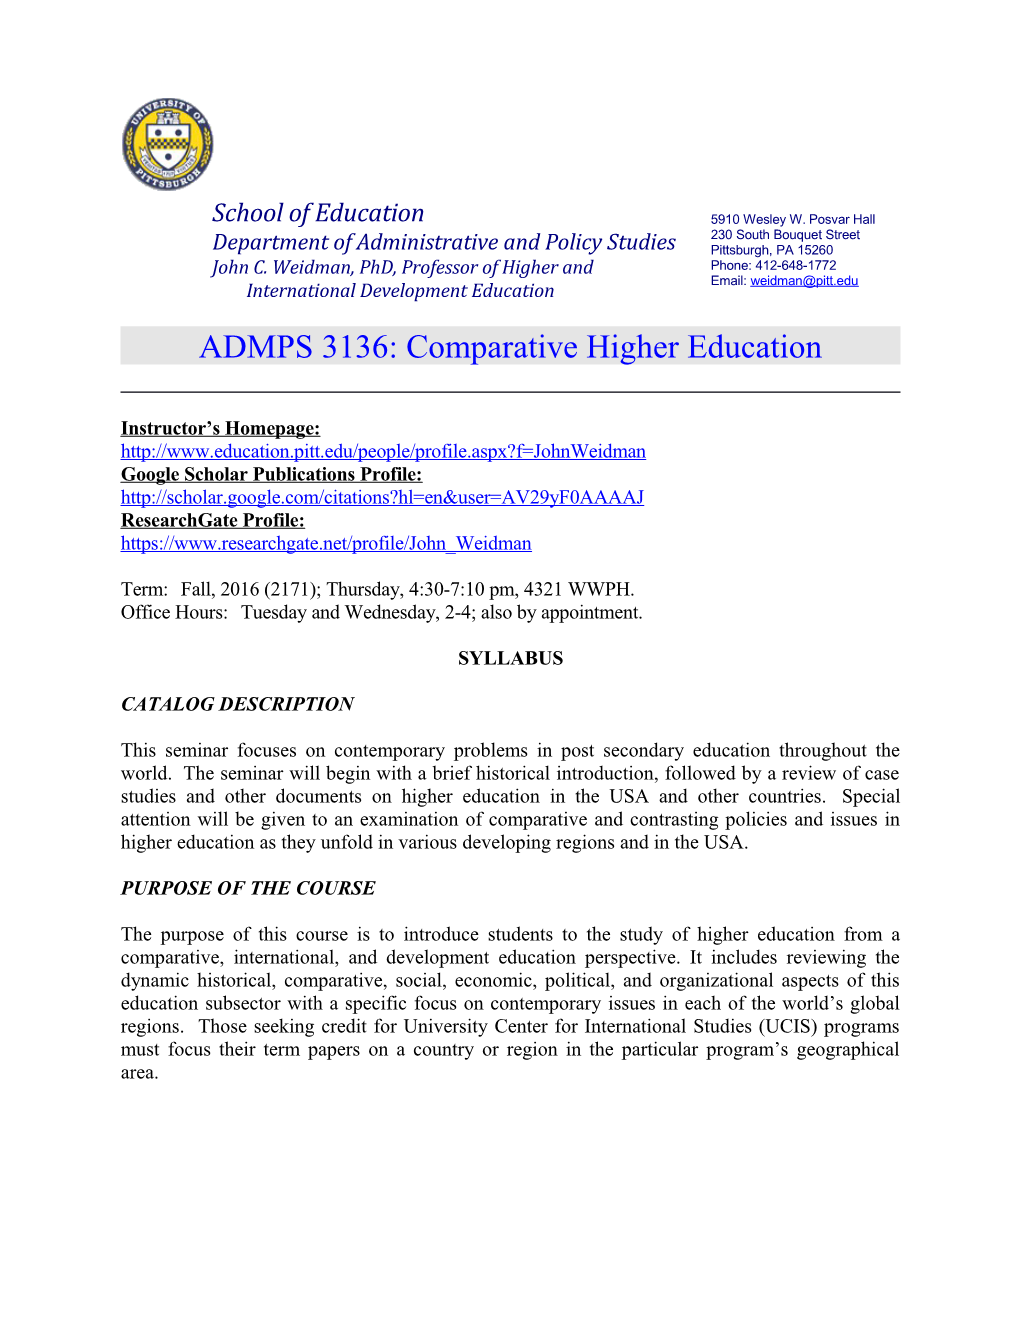 ADMPS 3136: Comparative Higher Education